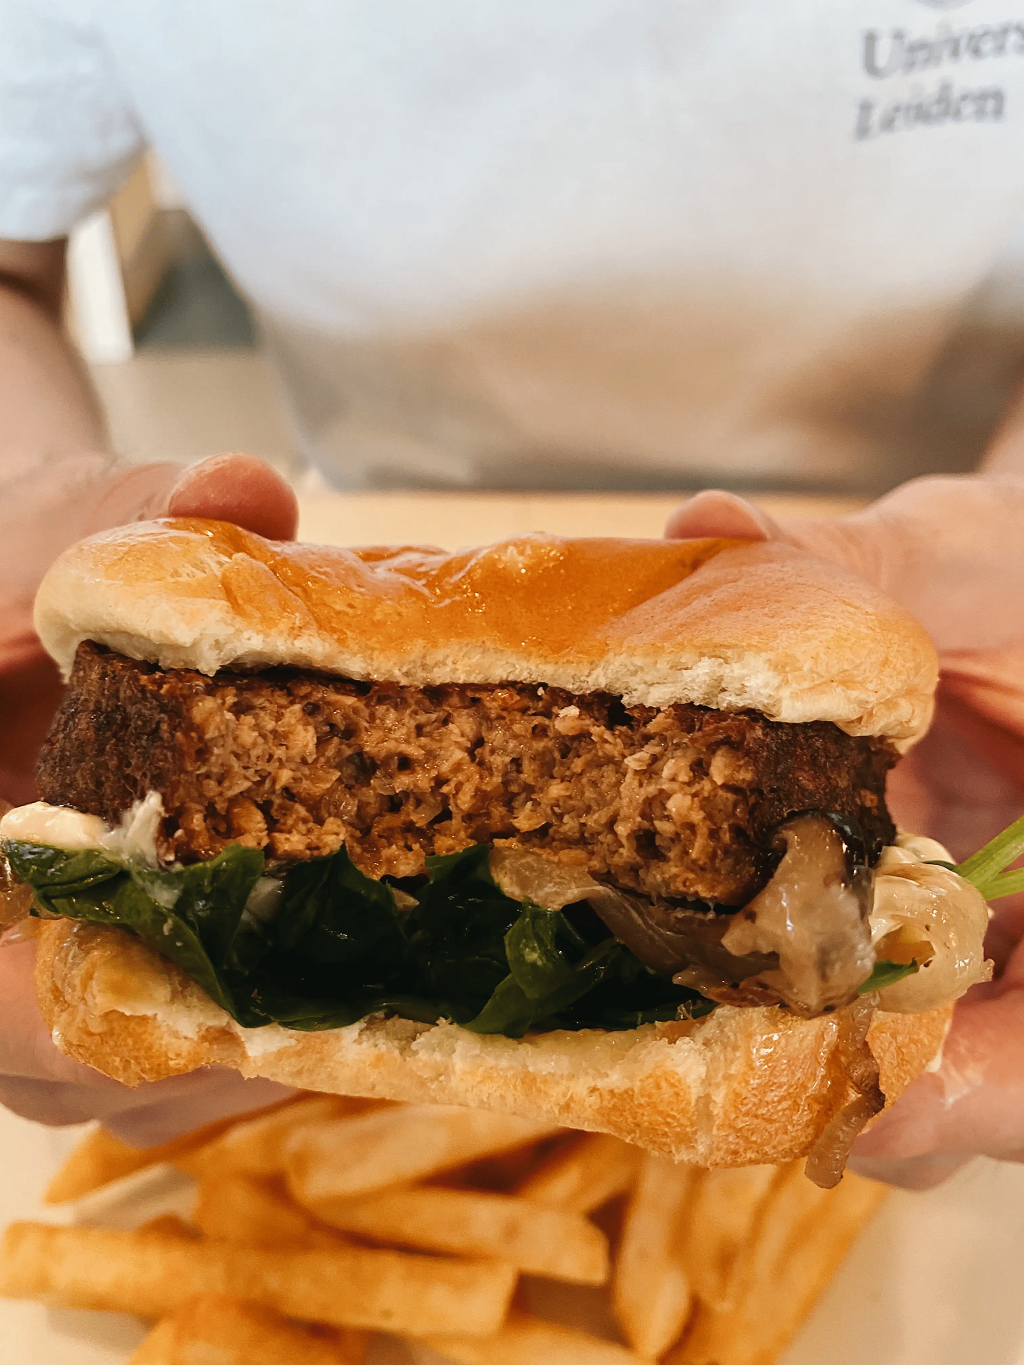 We tried out ikea's limited edition plant-based burger and this is our honest review | weirdkaya